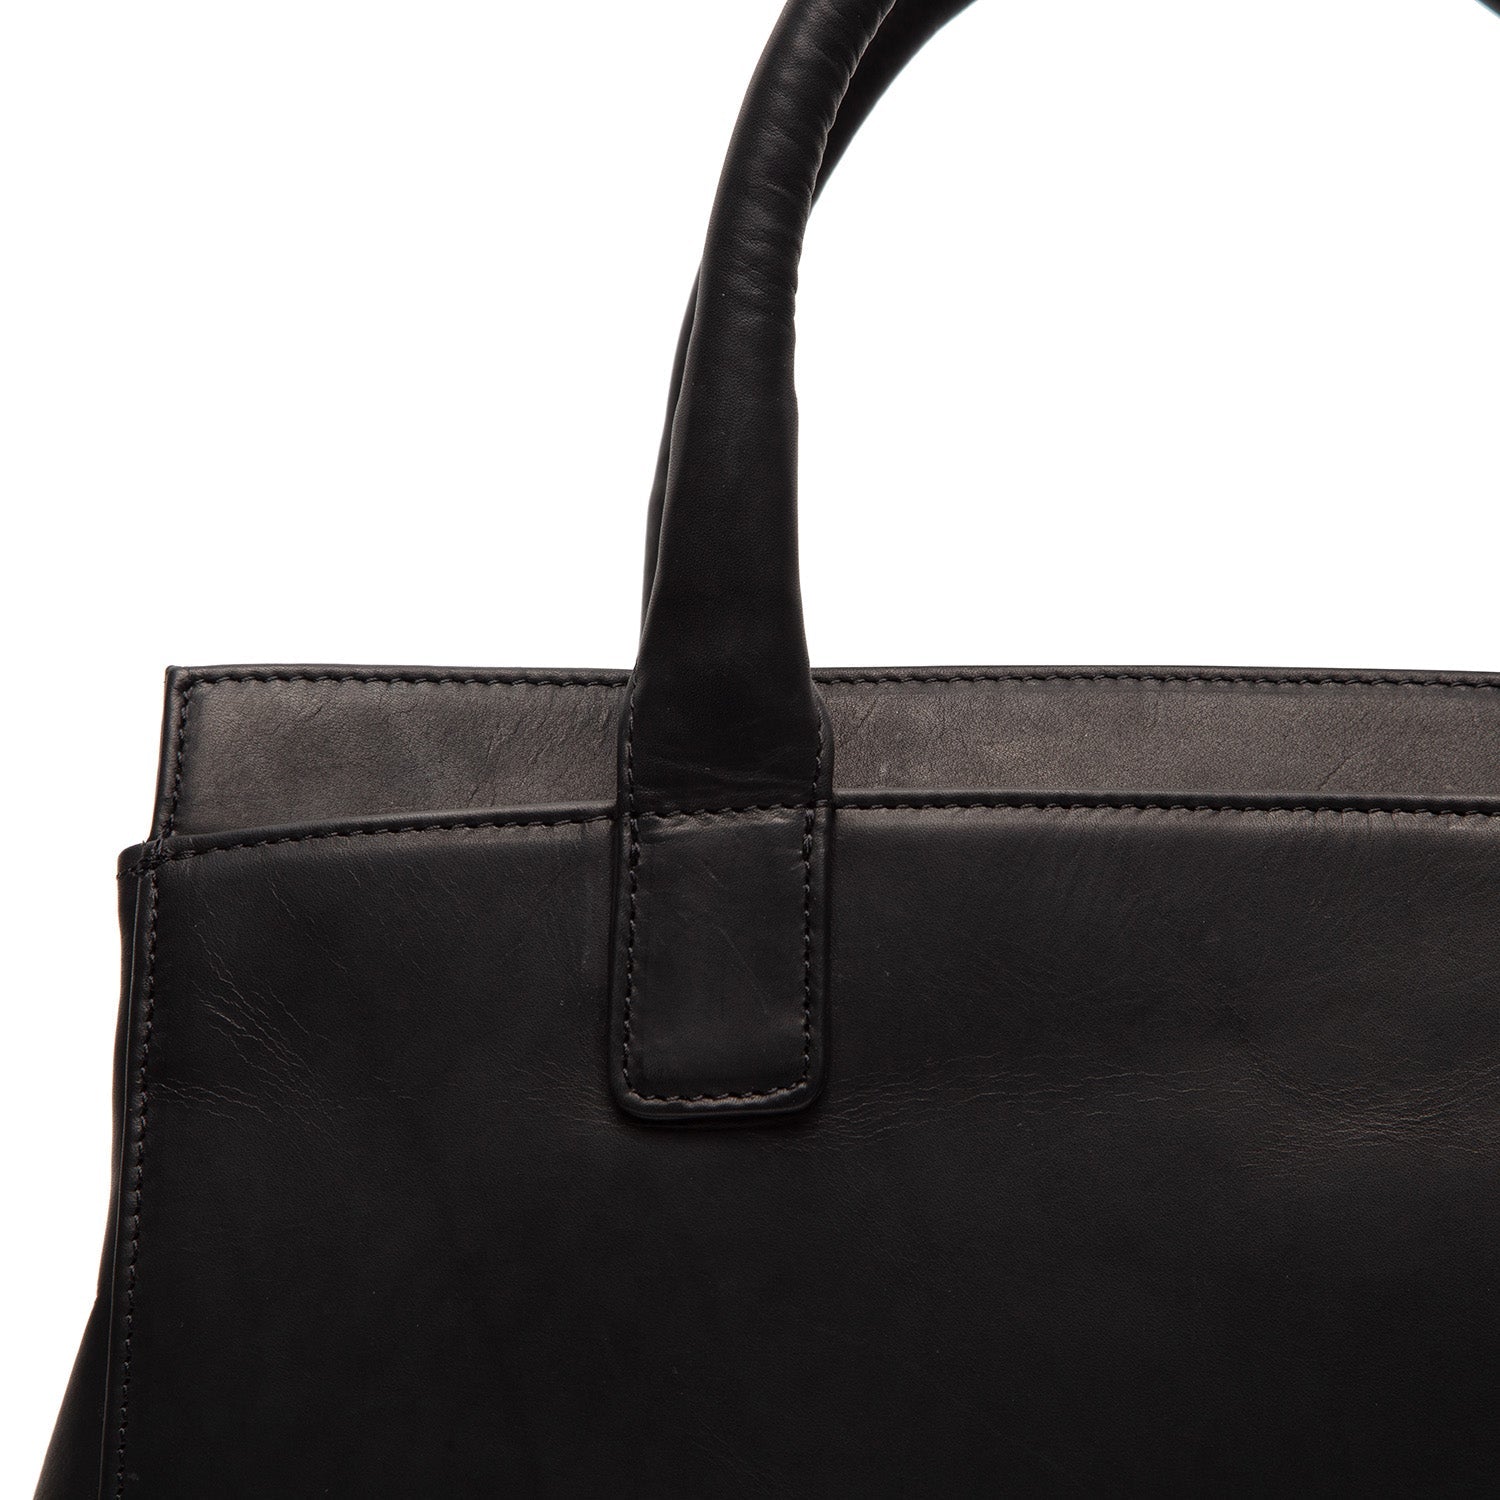 Schultertasche Garda waxed pull up Leder von The Chesterfield Brand - Laure Bags and Travel